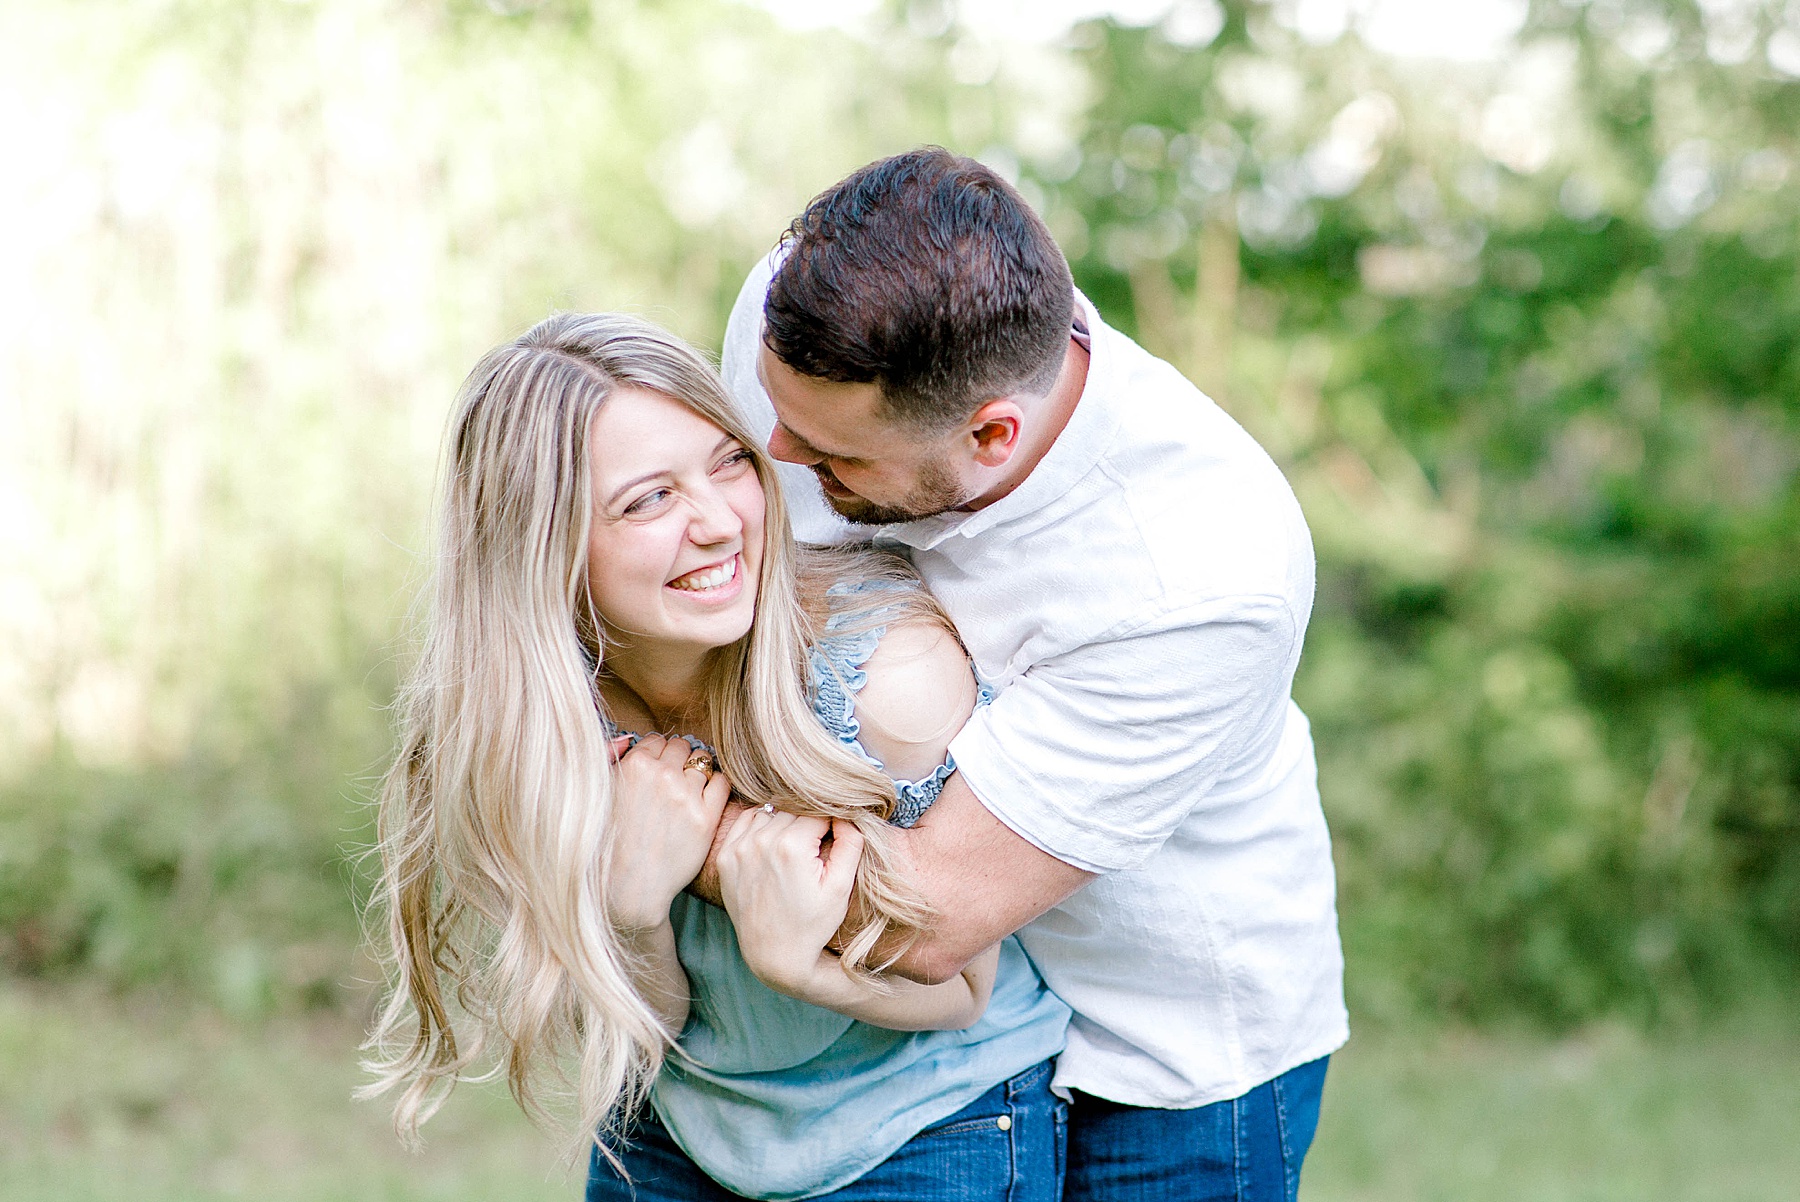 Lakeside Engagement Session (Dallas, Texas) | Becca Sue Photography - www.beccasuephotography.com